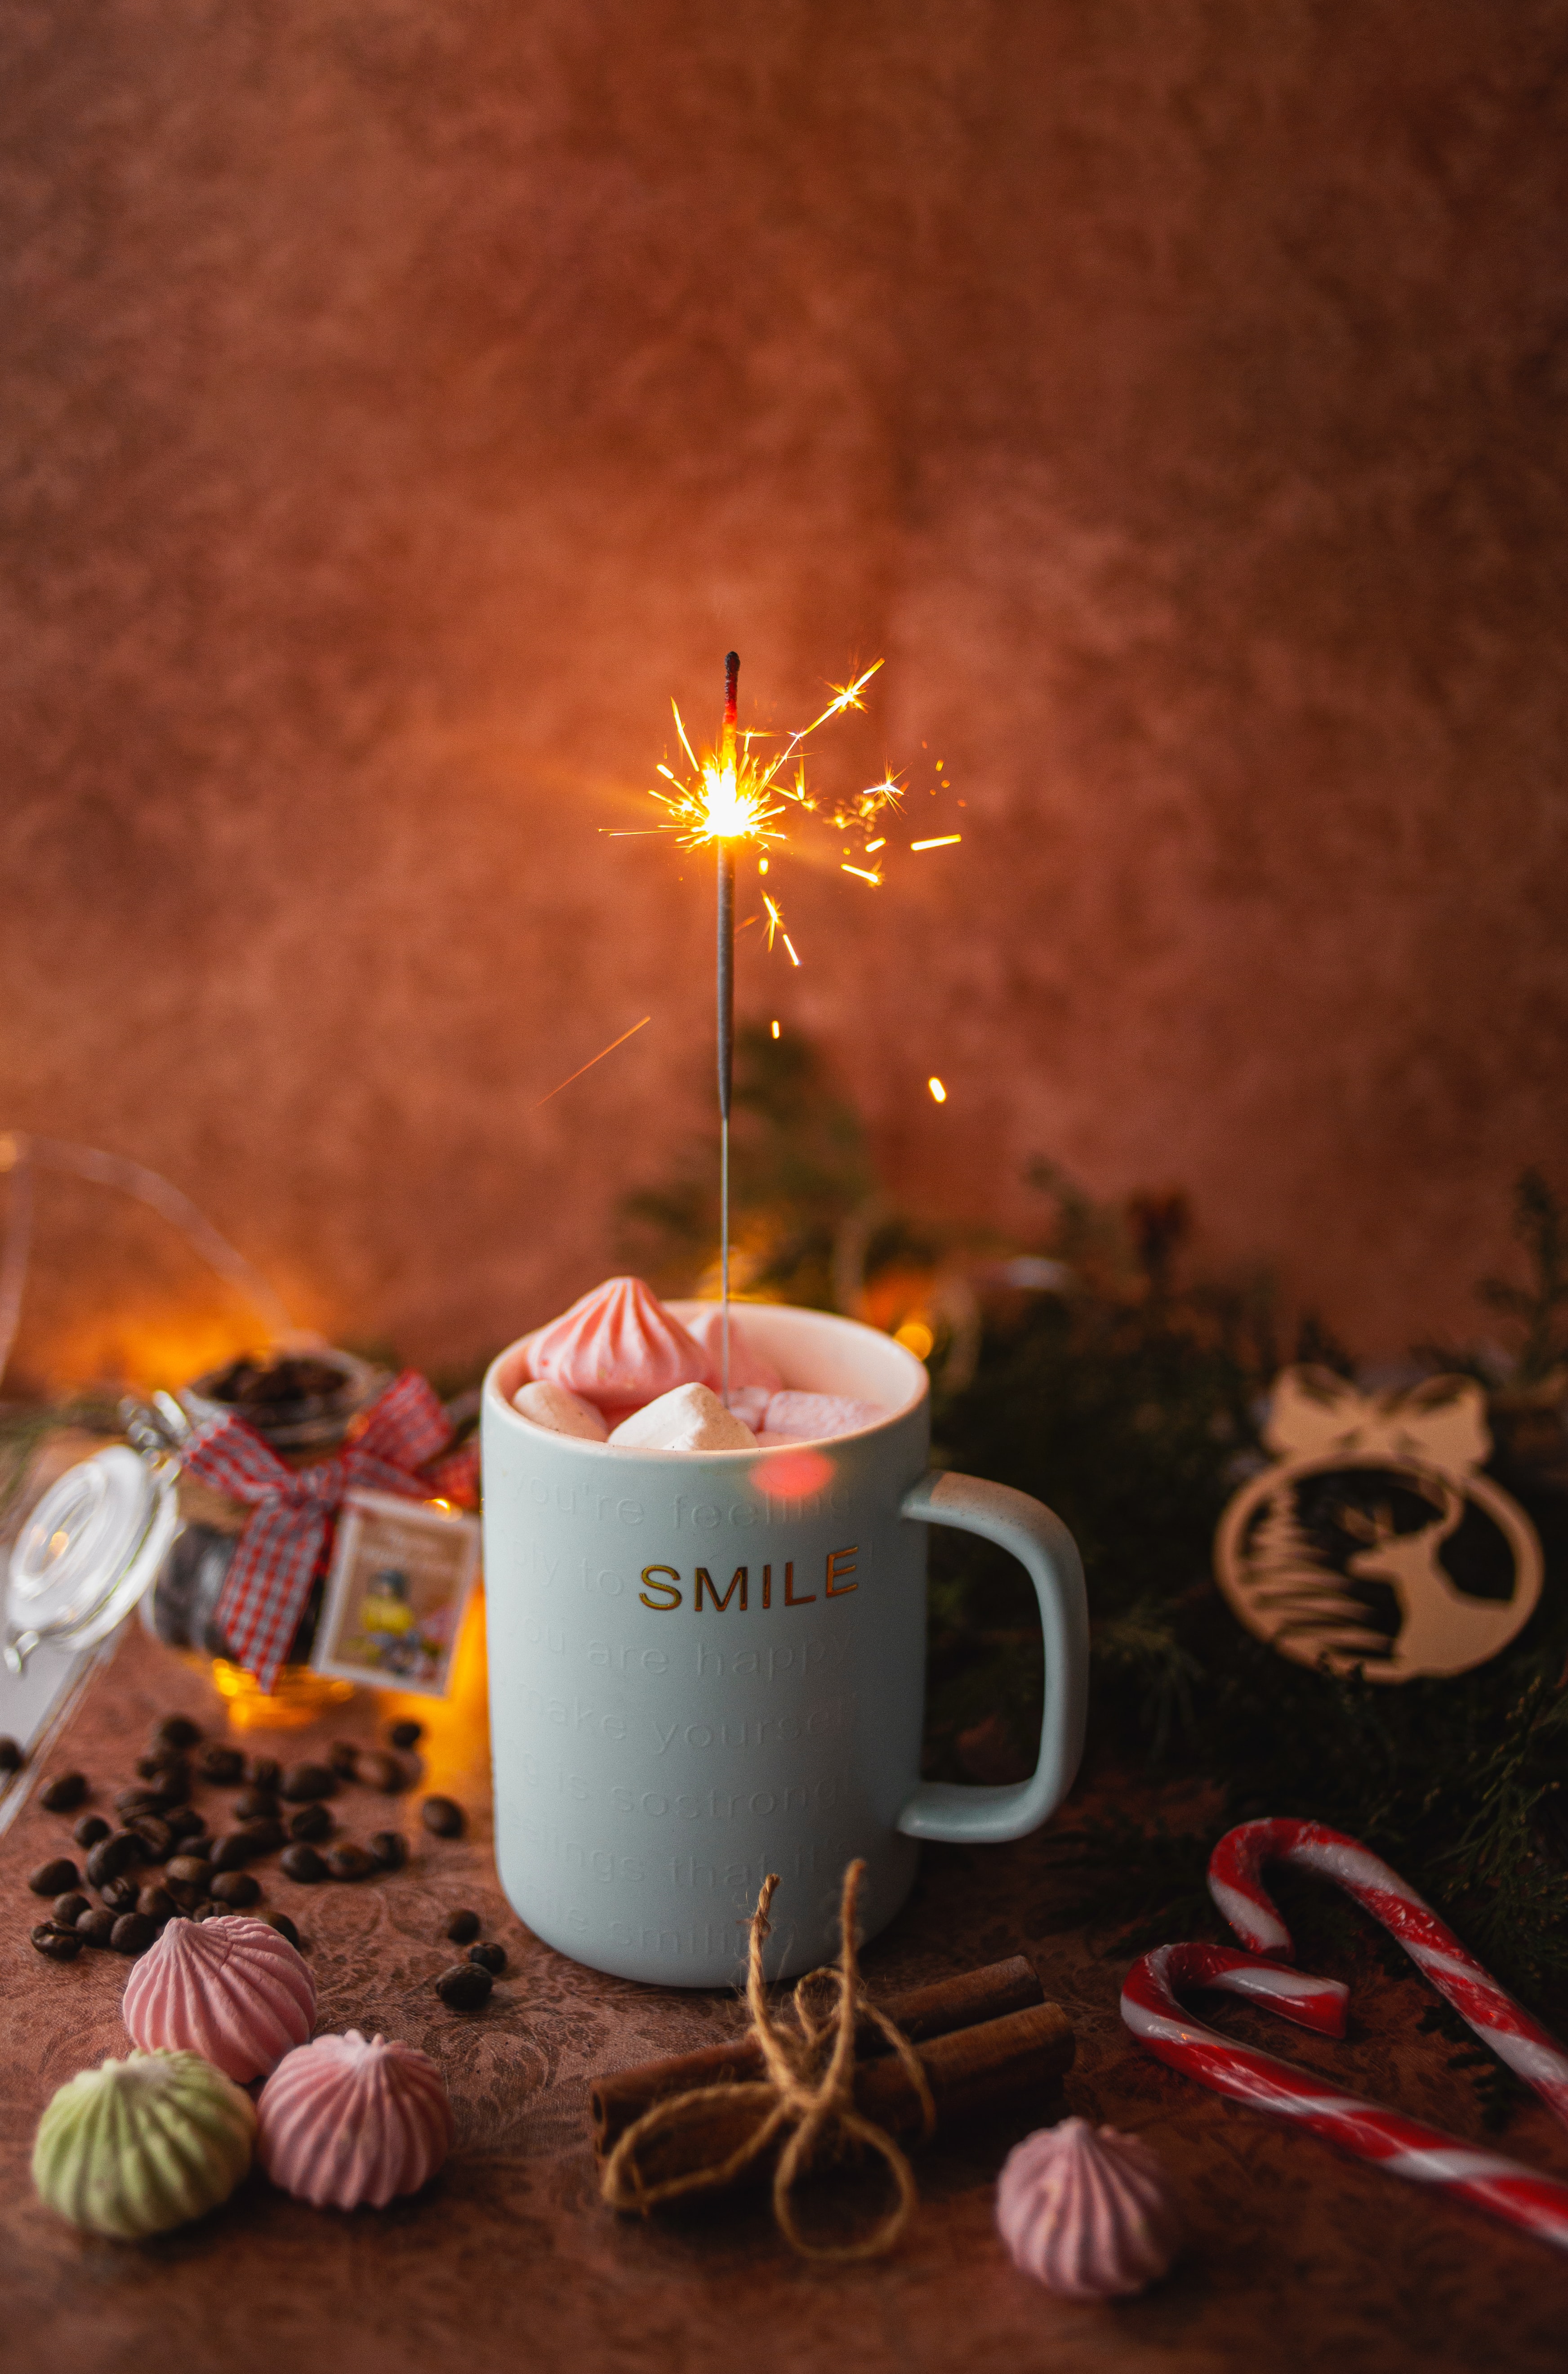 miscellanea, holiday, mug, sparks, cup, miscellaneous, marshmallow, bengal lights, sparklers, zephyr